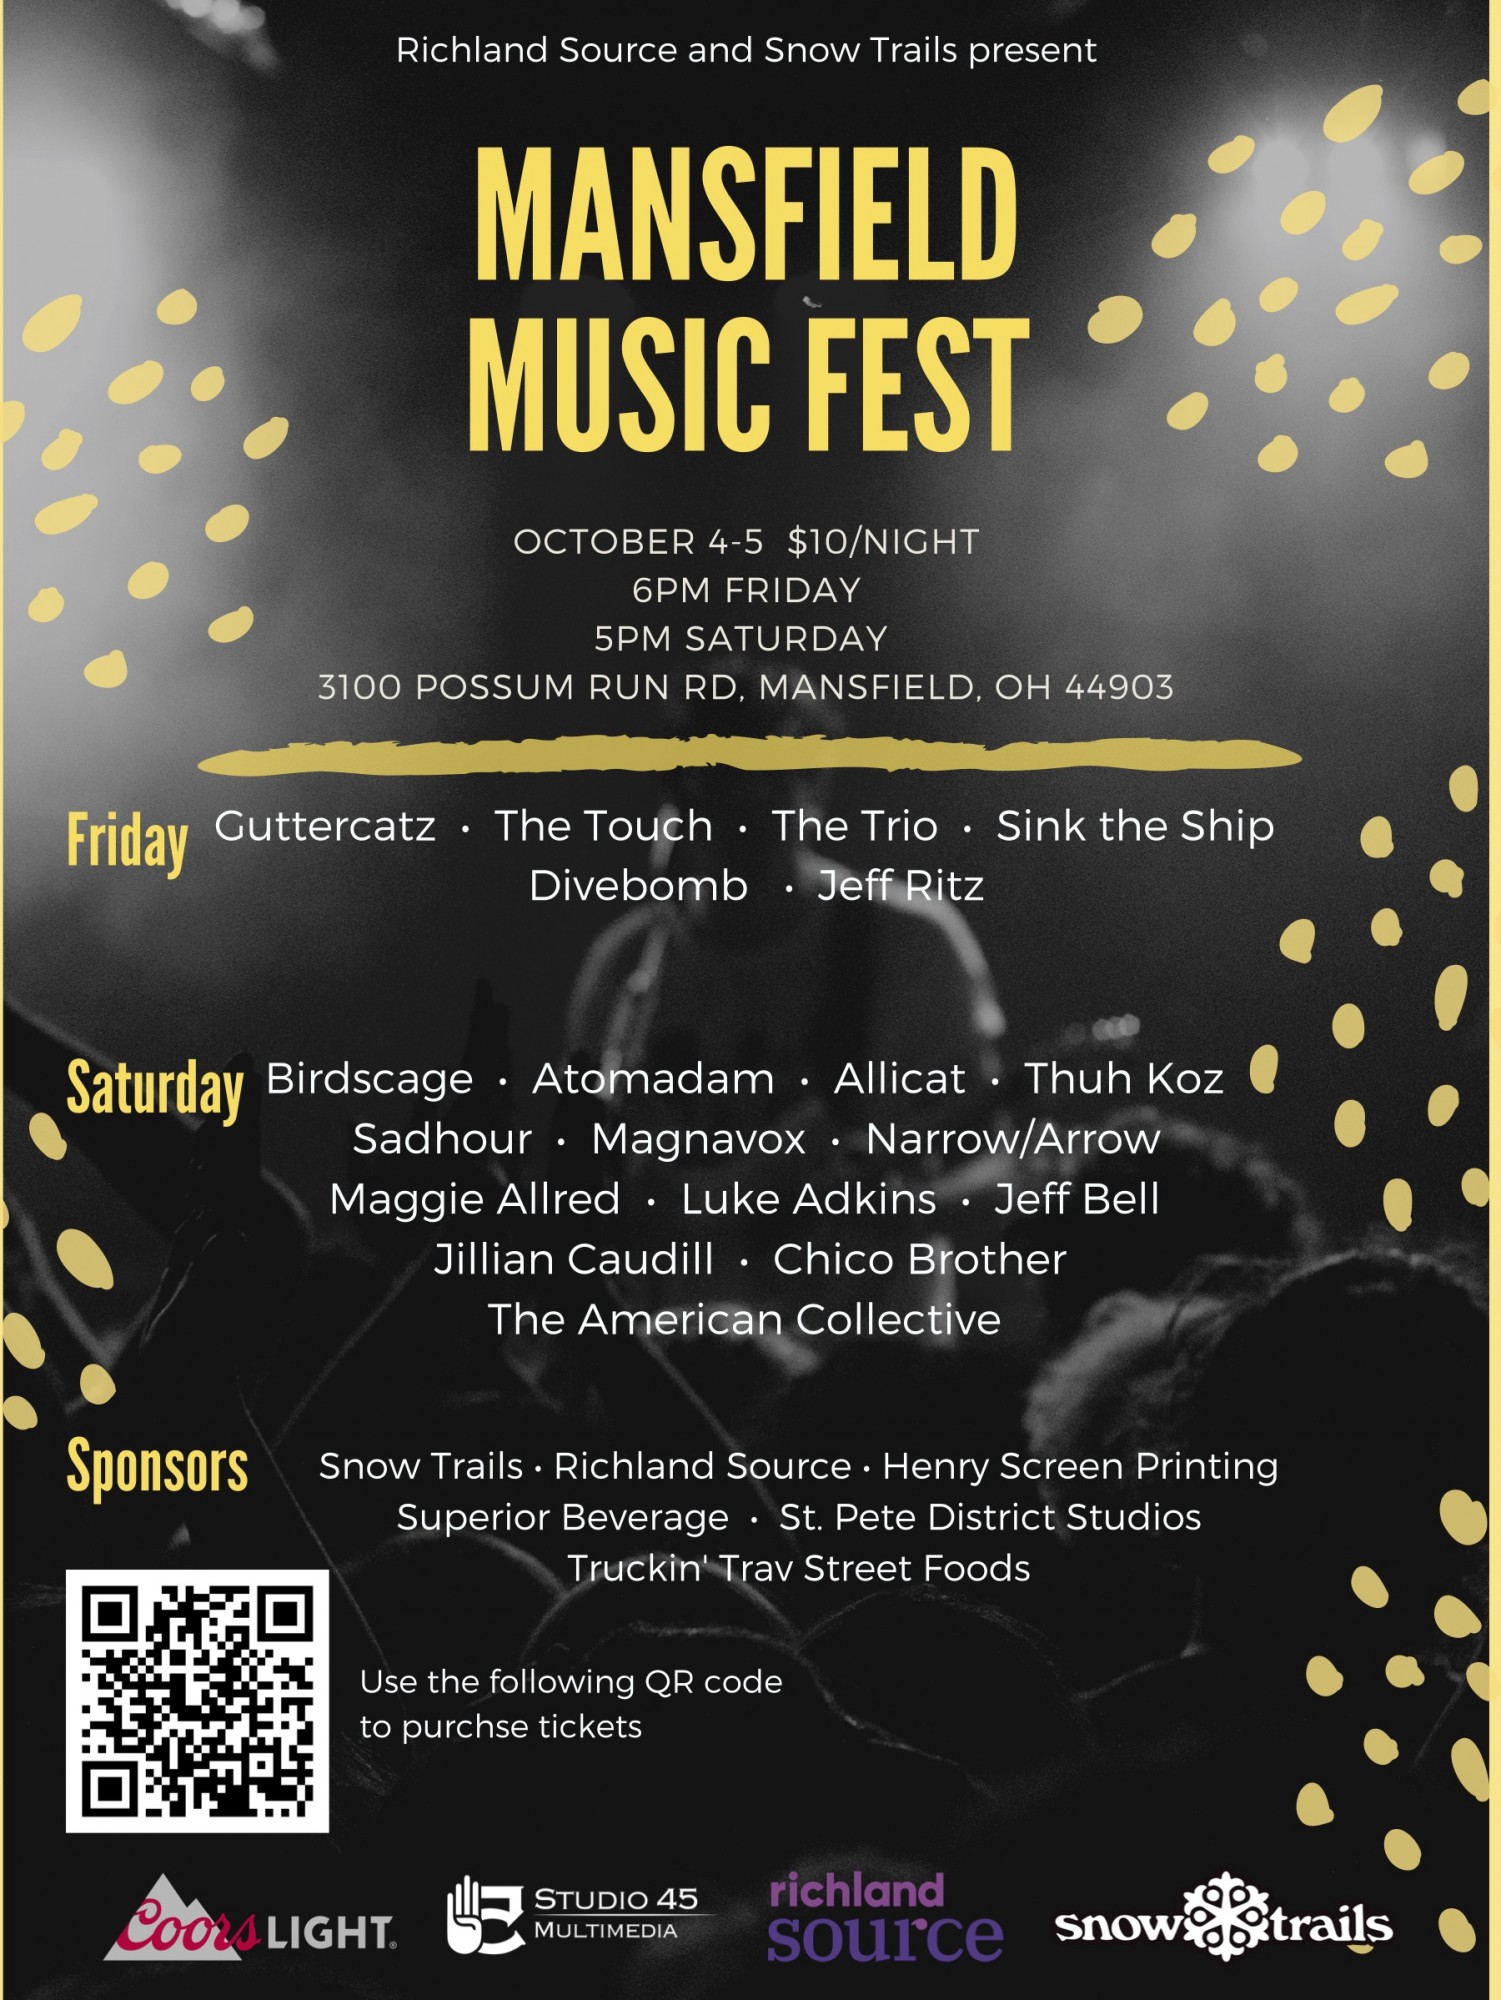 Mansfield Music Fest 2019 at Snow Trails Bands begin at 6PM Friday, October 4th and at 5PM Saturday, October 5th